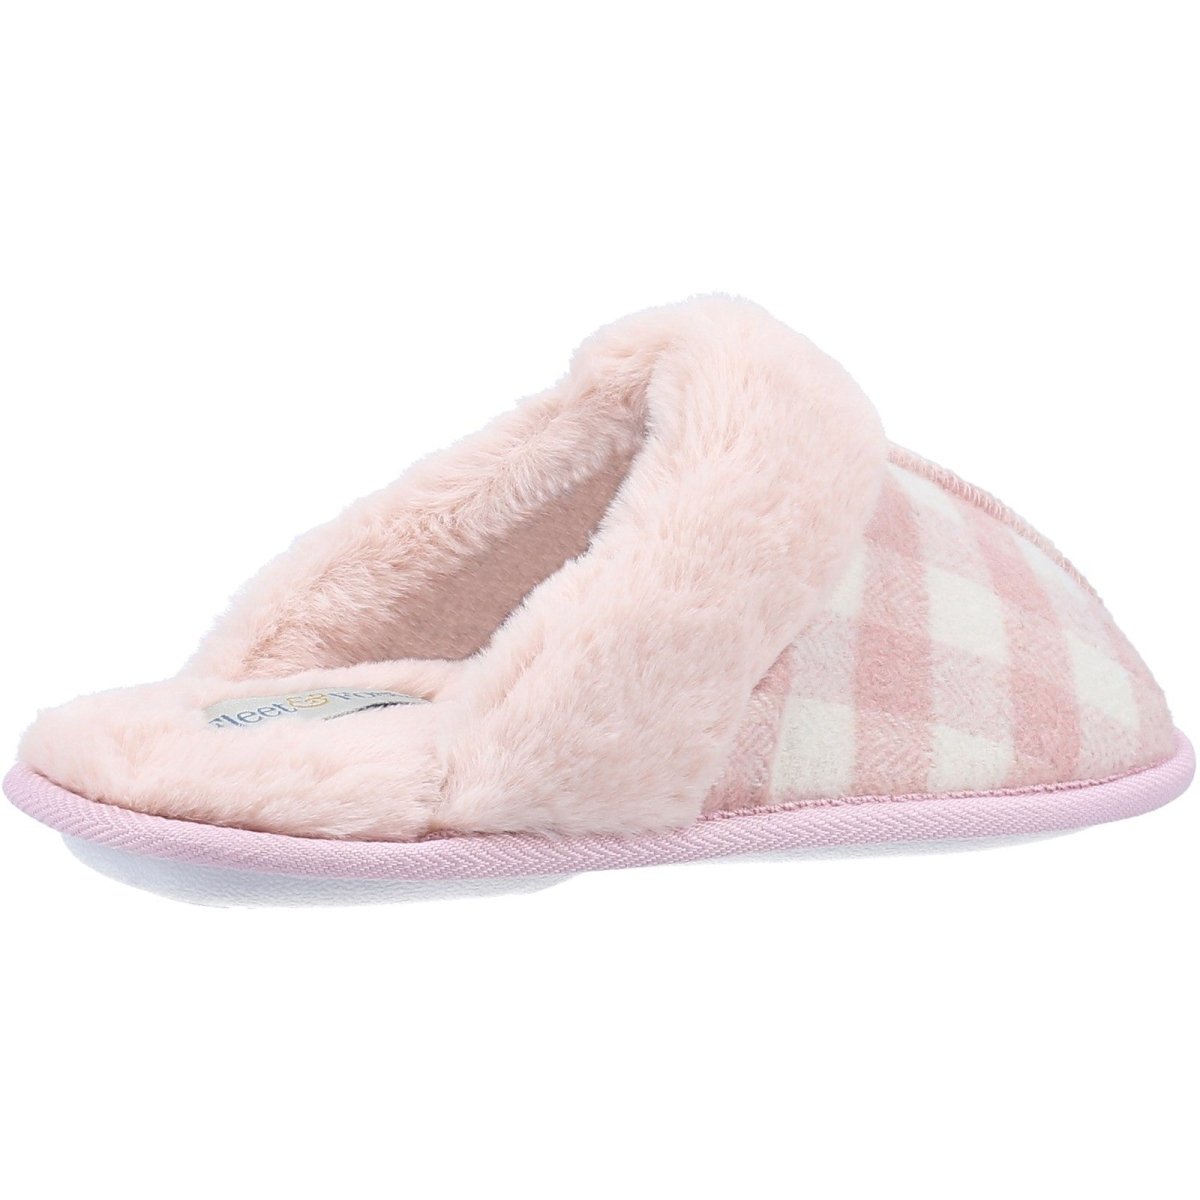 Fleet & Foster Neath Chequered Warm Ladies Mule Slippers - Shoe Store Direct